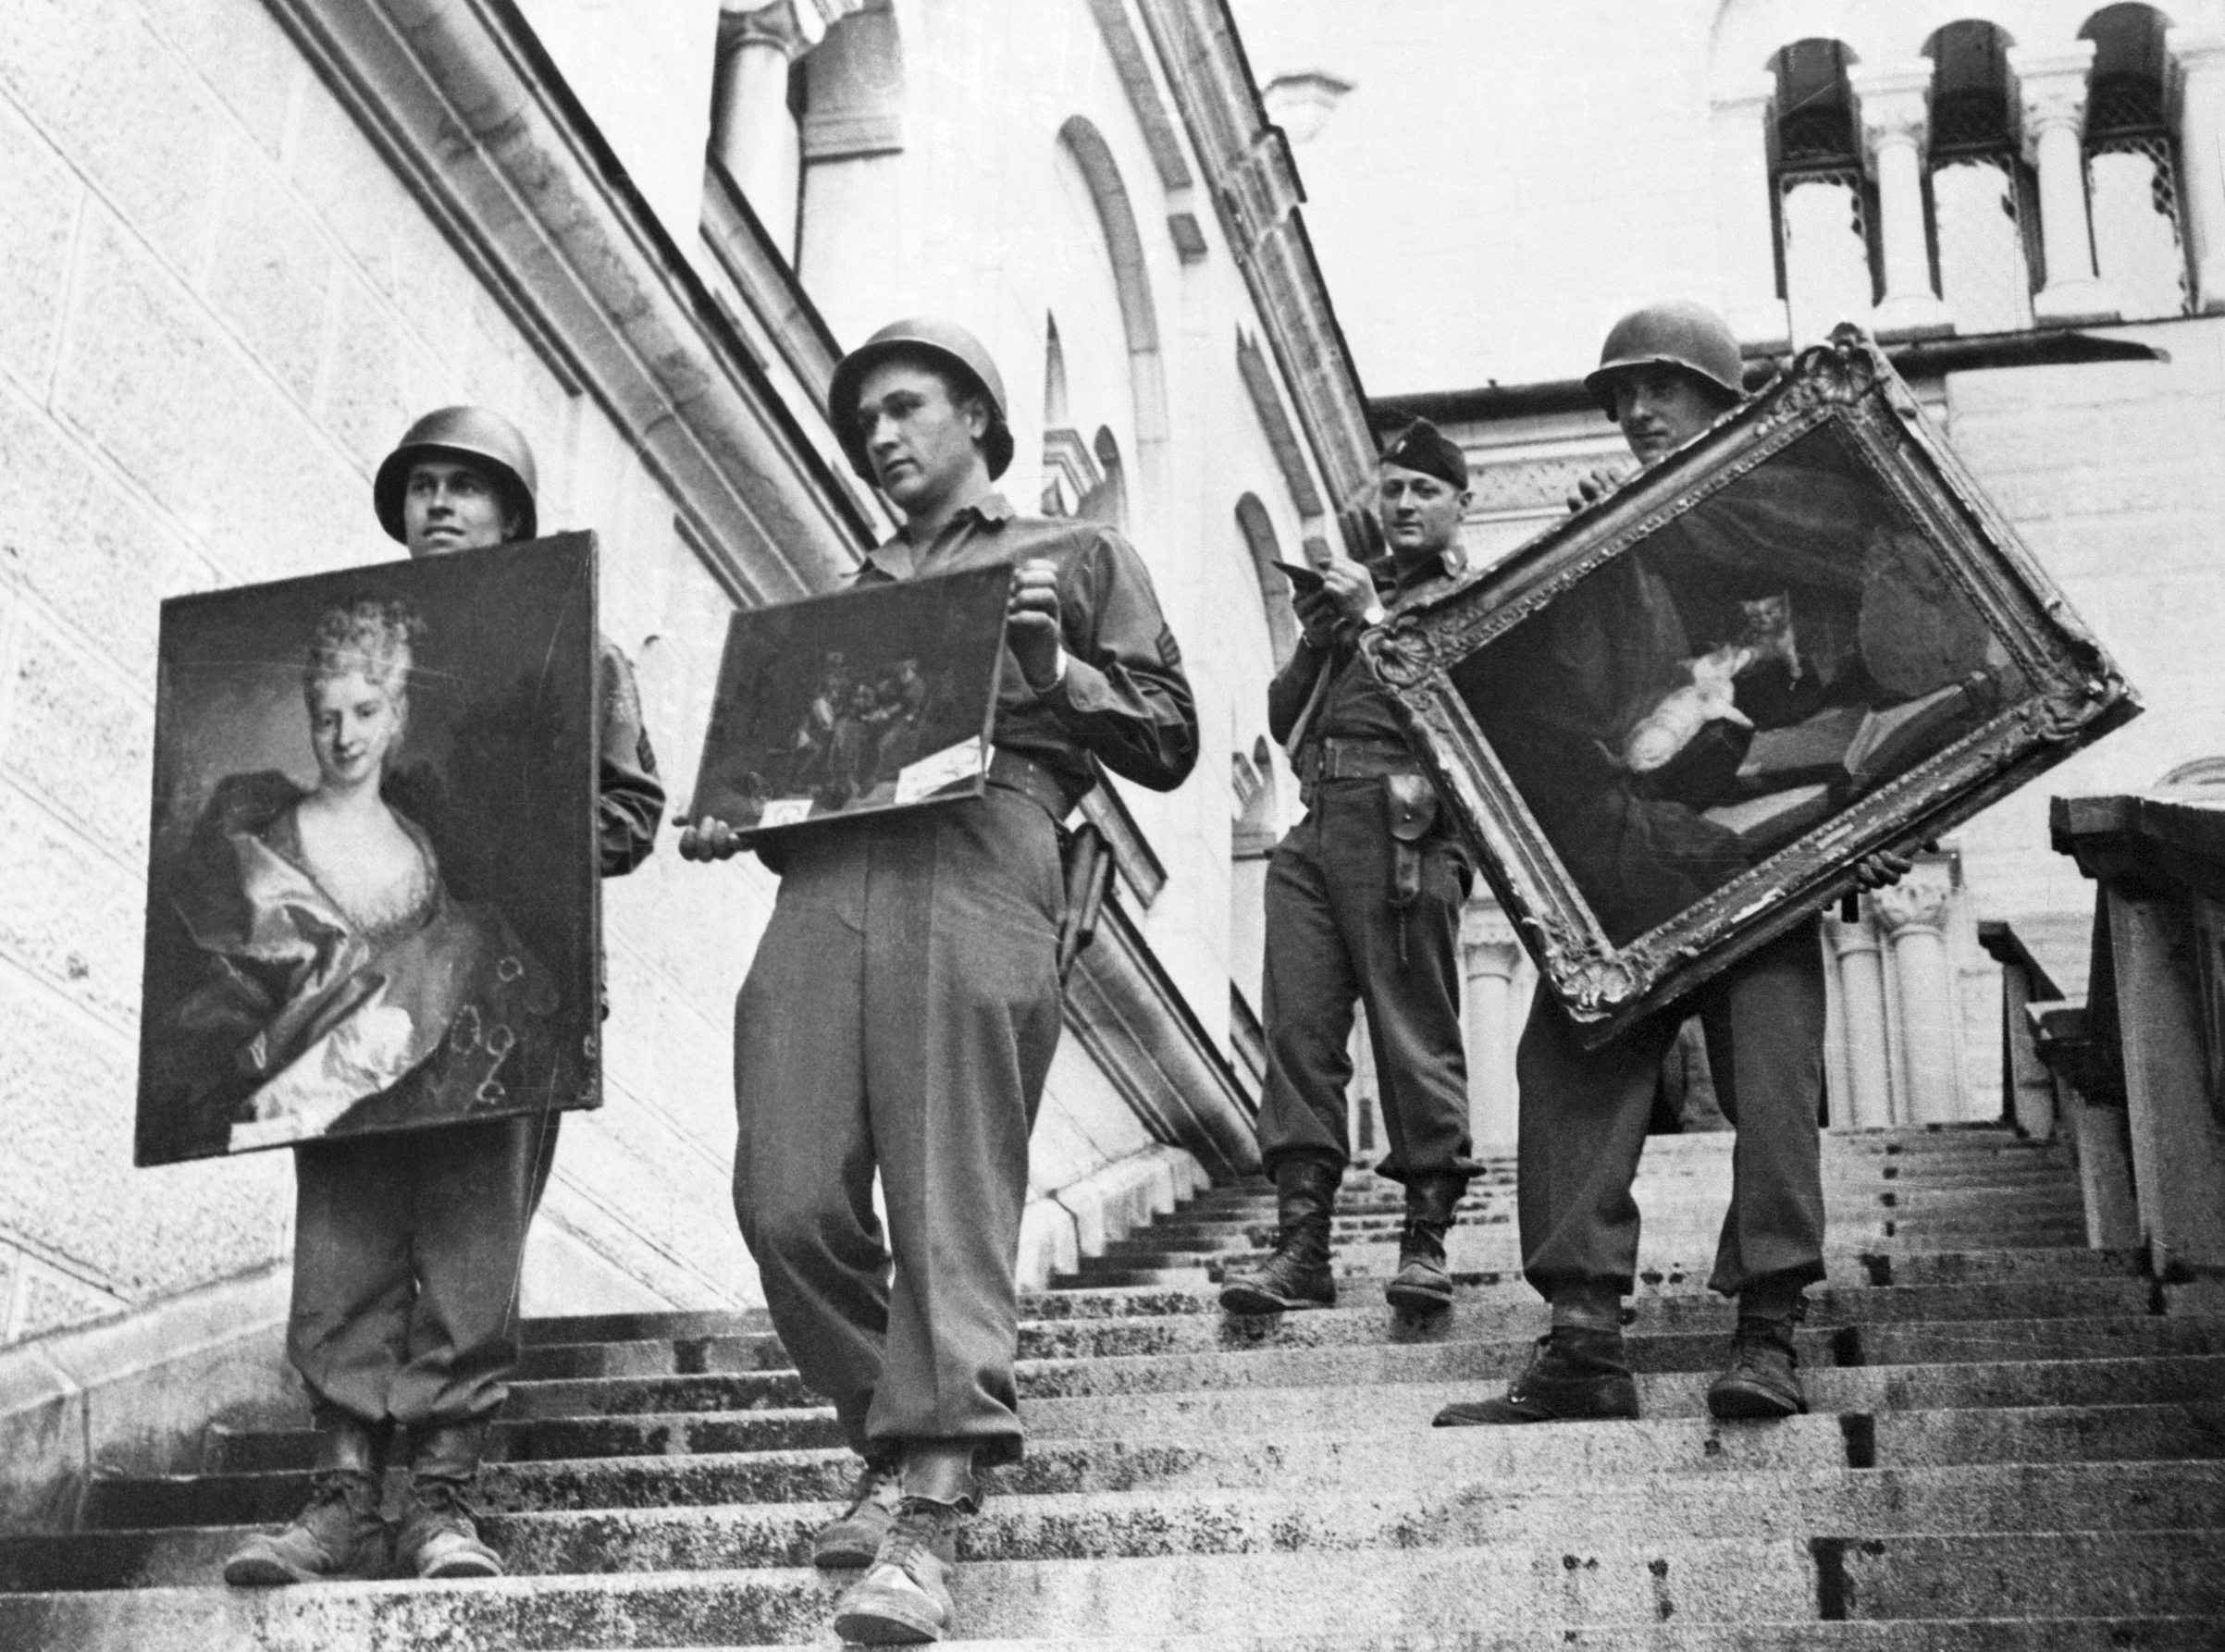 While a lieutenant checks his list (background), 7th Army soldiers carry three valuable paintings down the steps of Neunschwanstein Castle at Fussen, Germany, where they were a part of the collection looted by the Nazis from conquered countries. (Bettmann/Getty Images)